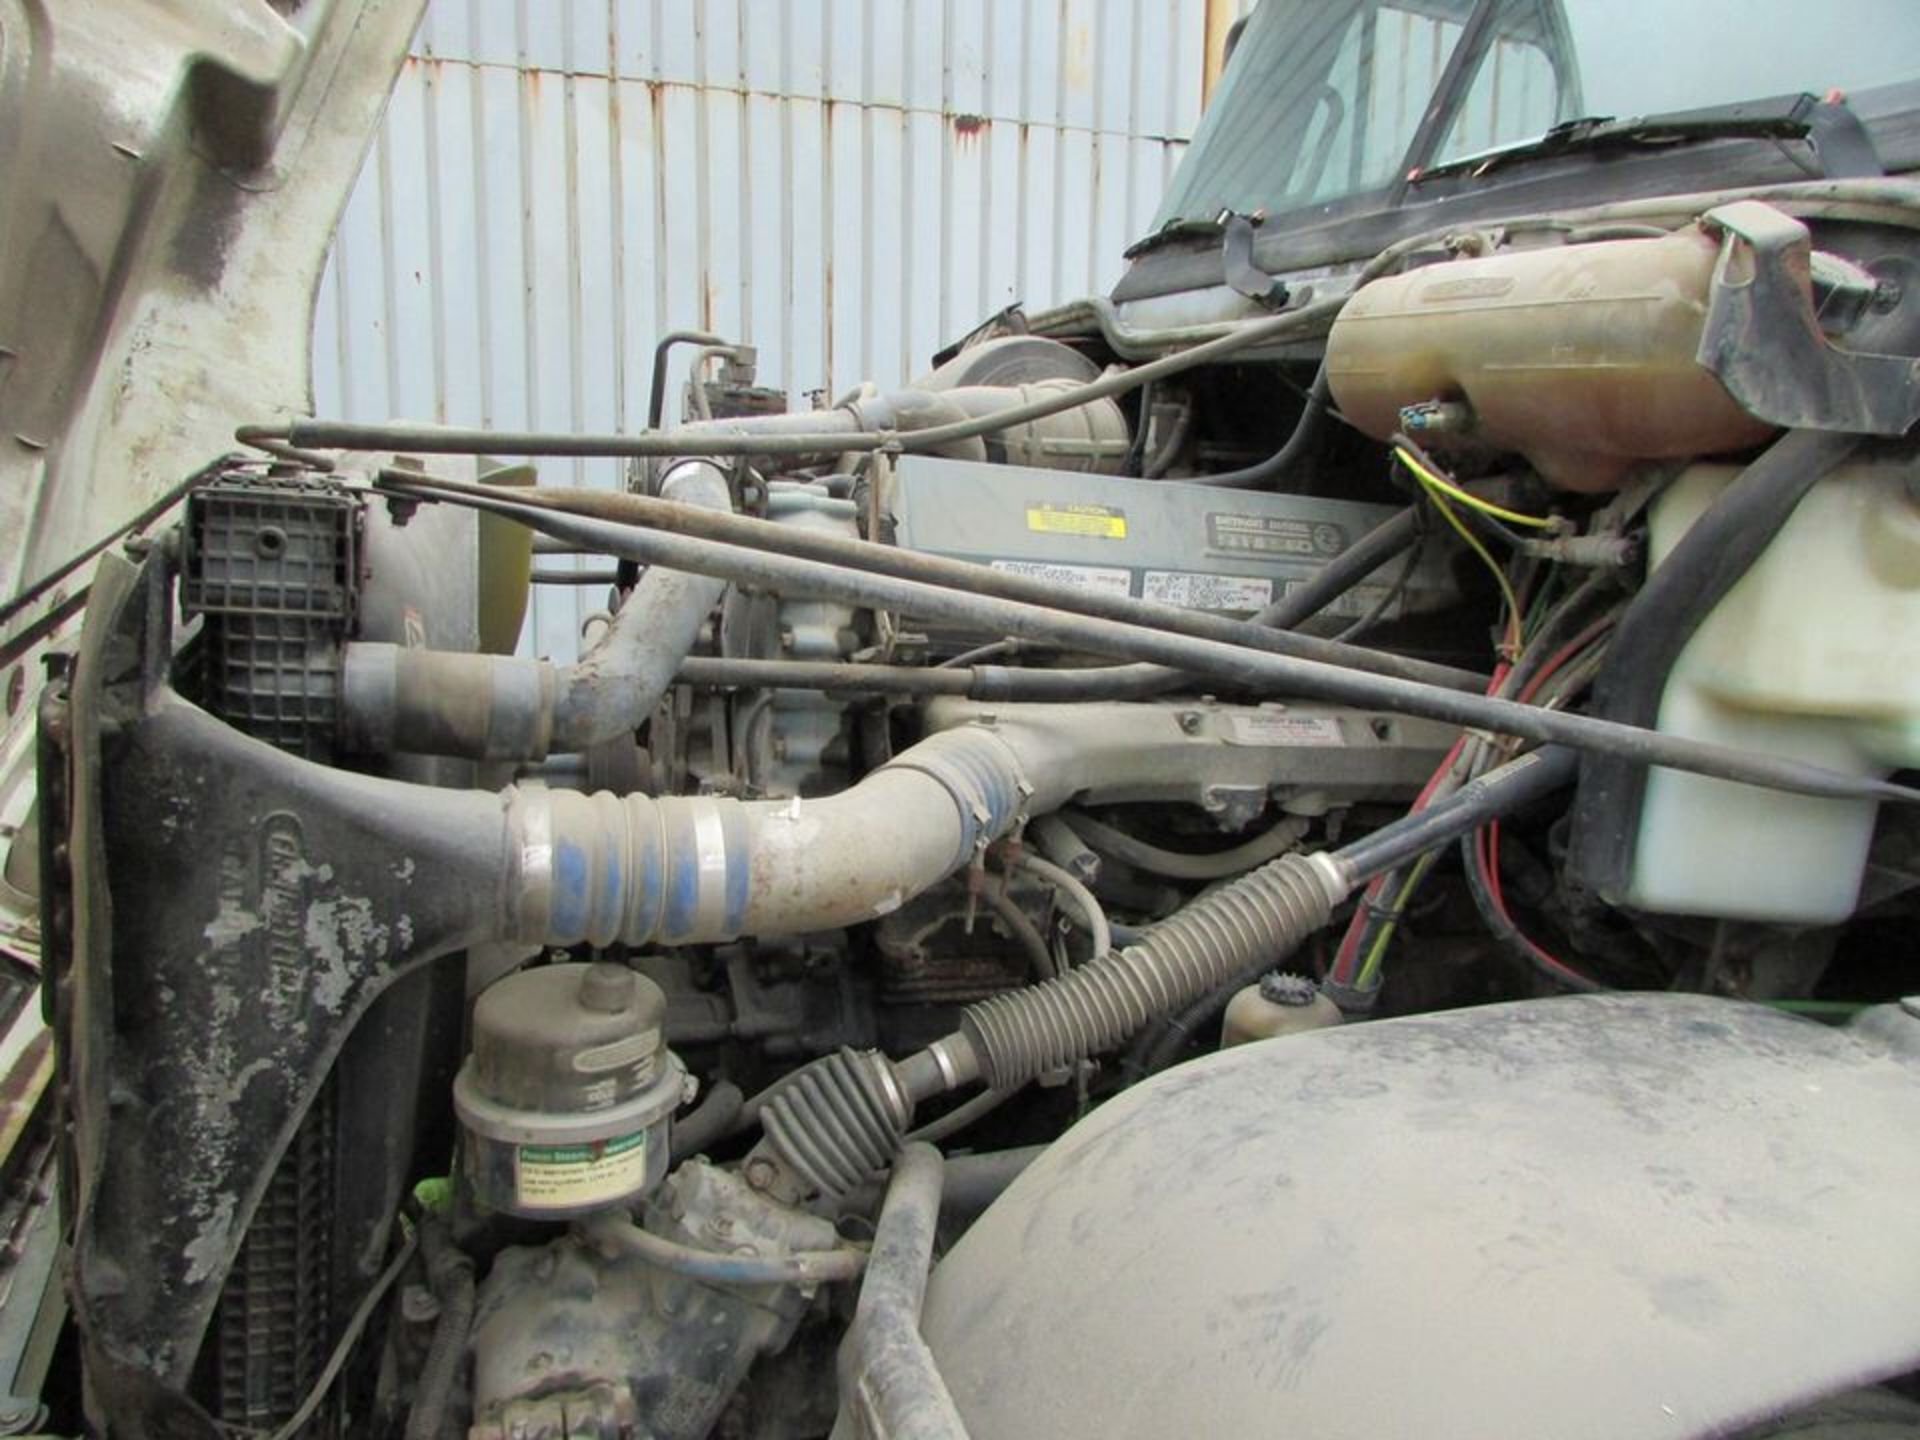 2002 Freightliner Century Class Day Cab Truck Tractor, 52,000 GVWR, Eaton Fuller 10-Speed Manual - Image 13 of 20